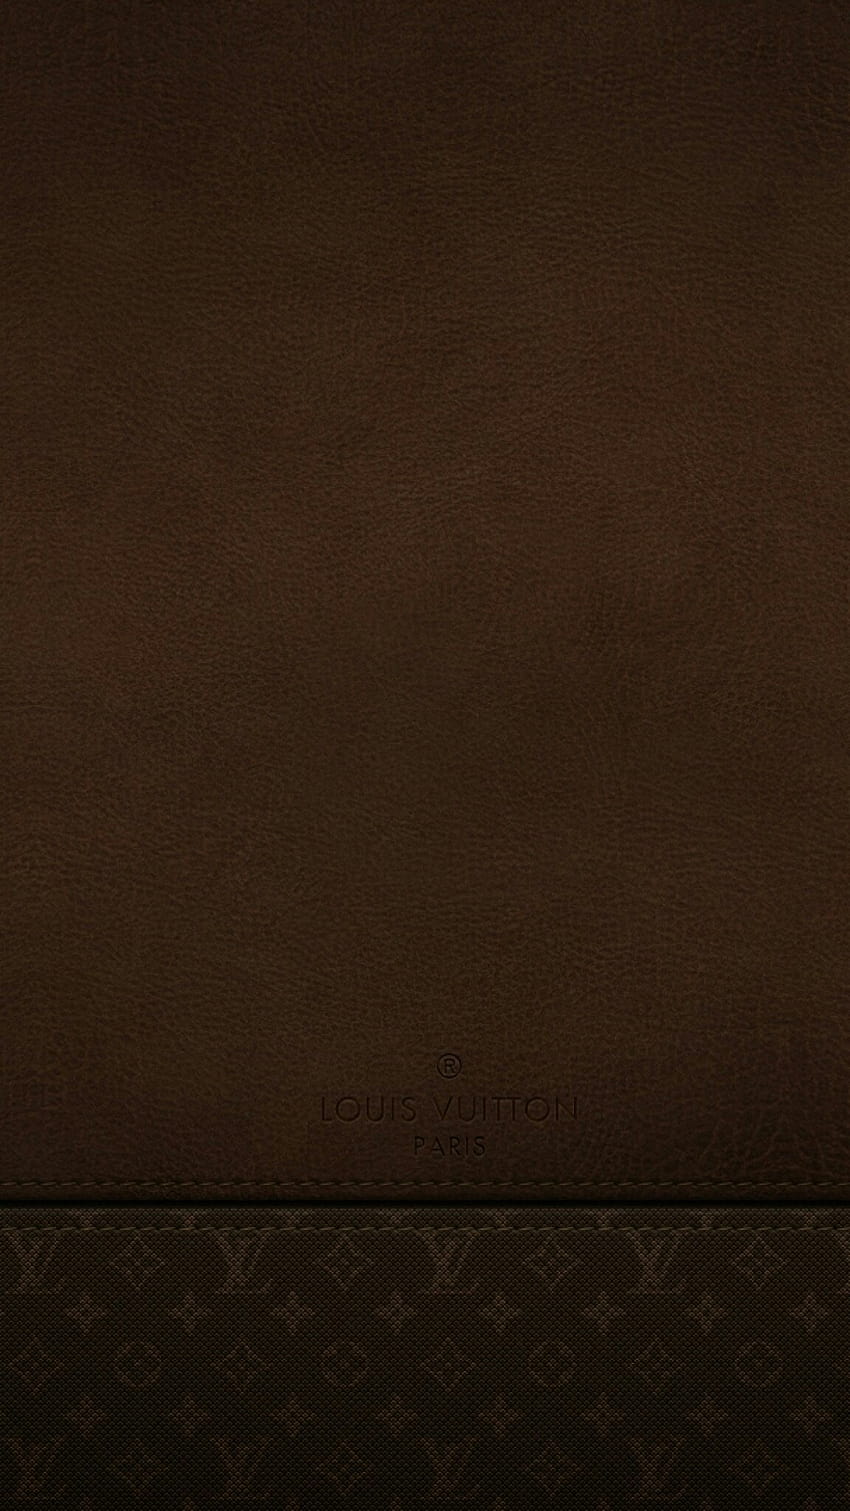 4 Brown Leather, color leather HD phone wallpaper